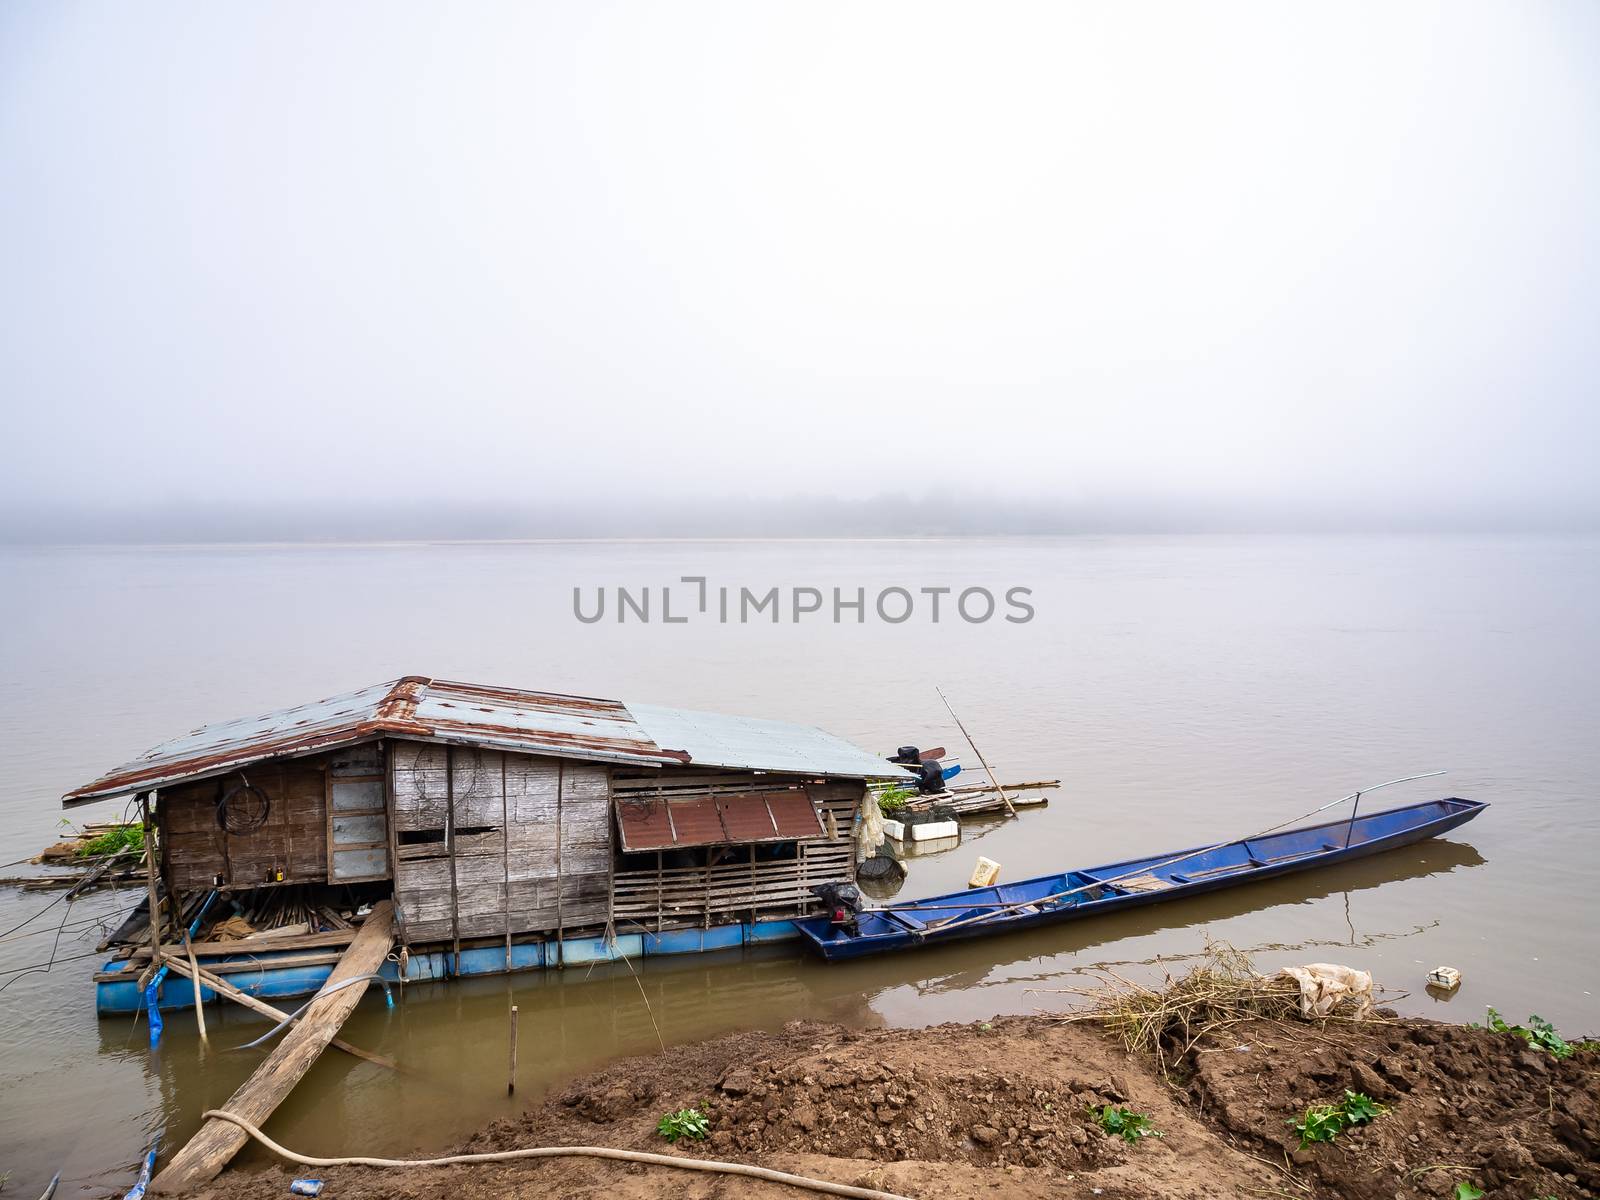 Floating house on Mekong river at Chiangkhan in Loei province, Thailand